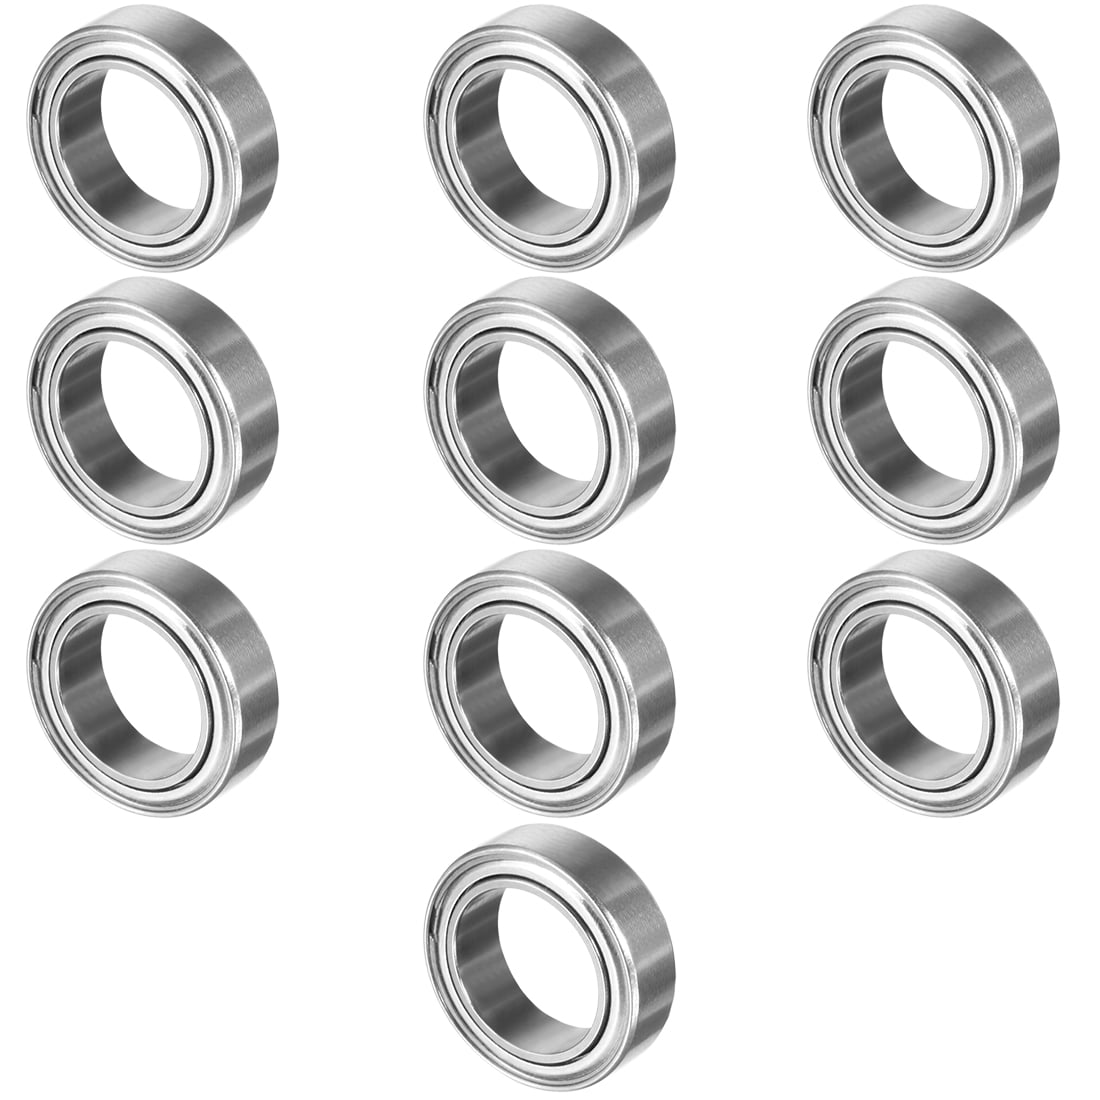 Details about   10pcs MR128ZZ 8mm x12mm x3.5mm Thickness Bearing Steel Mini Groove Ball Bearings 